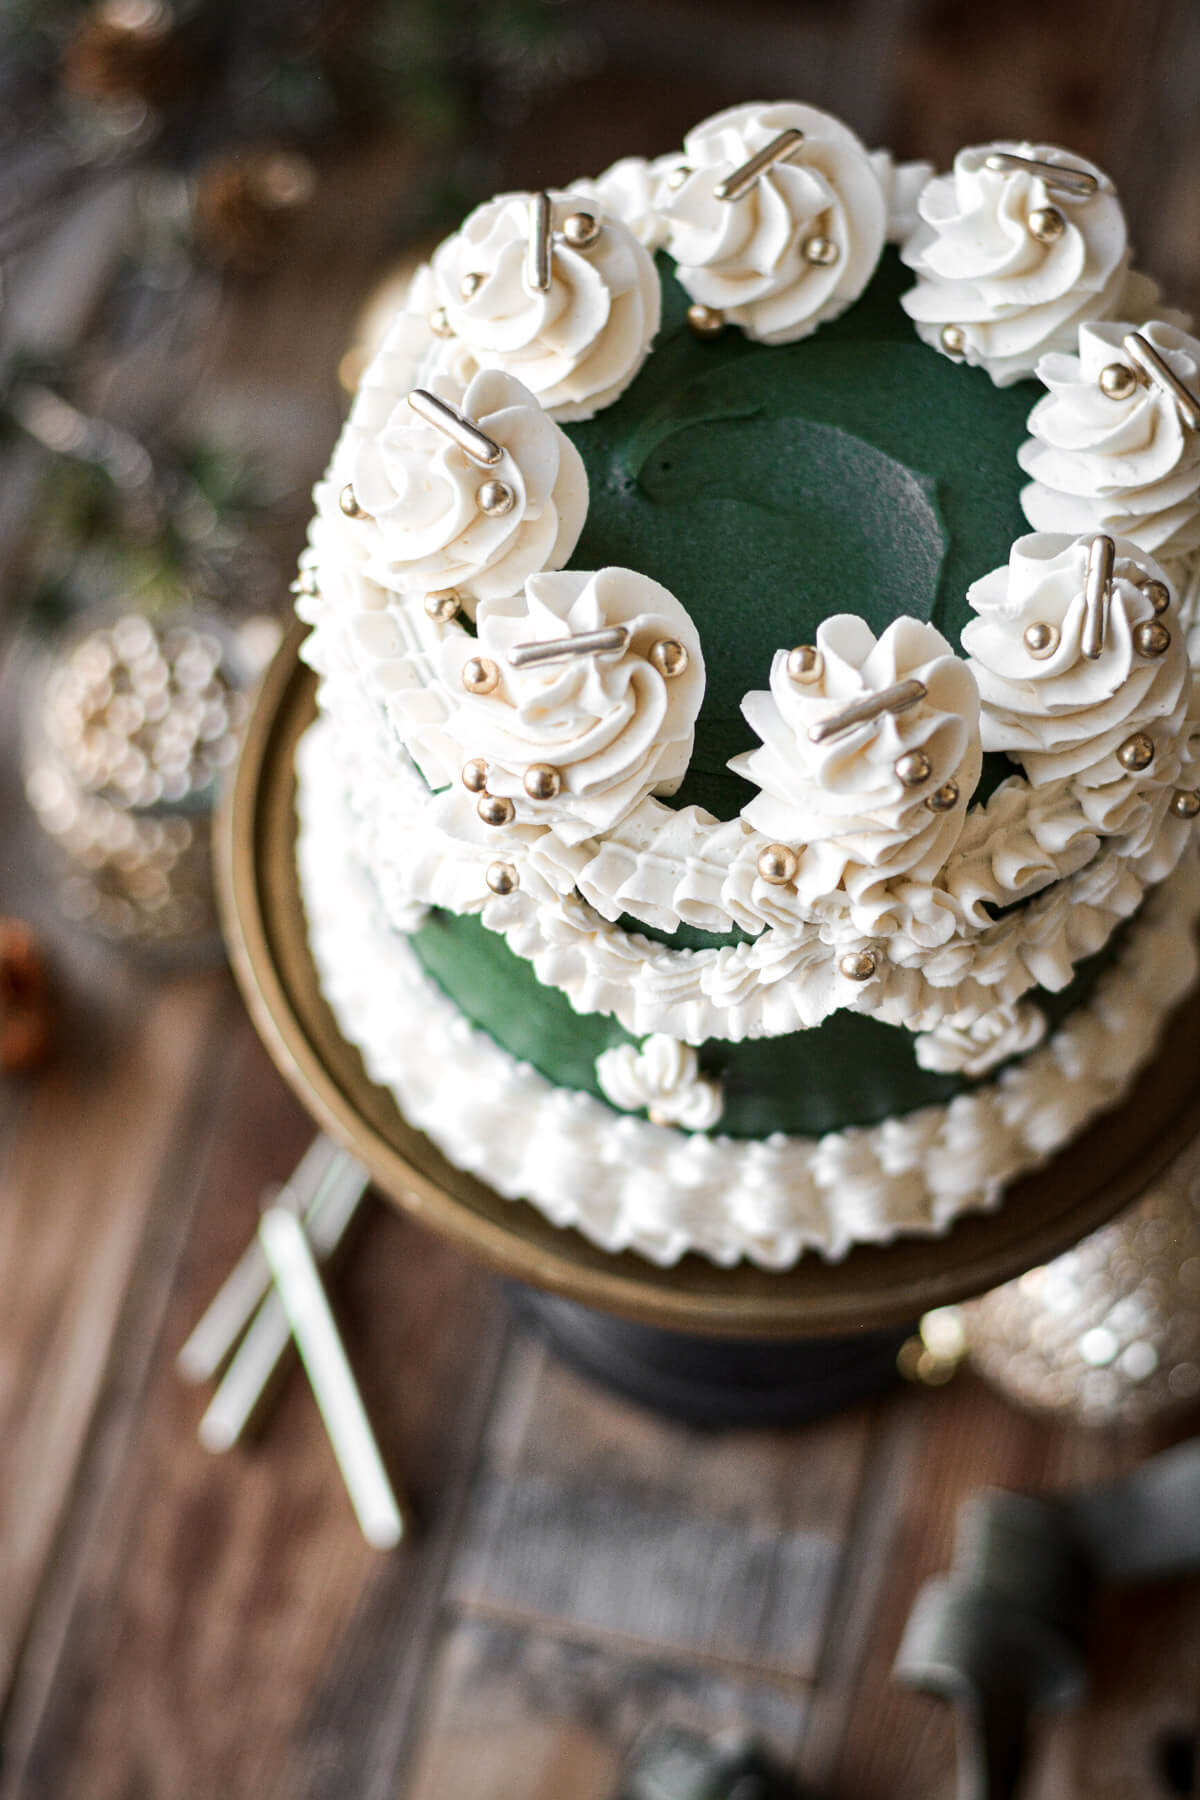 Green and white Christmas cake with gold dragees.